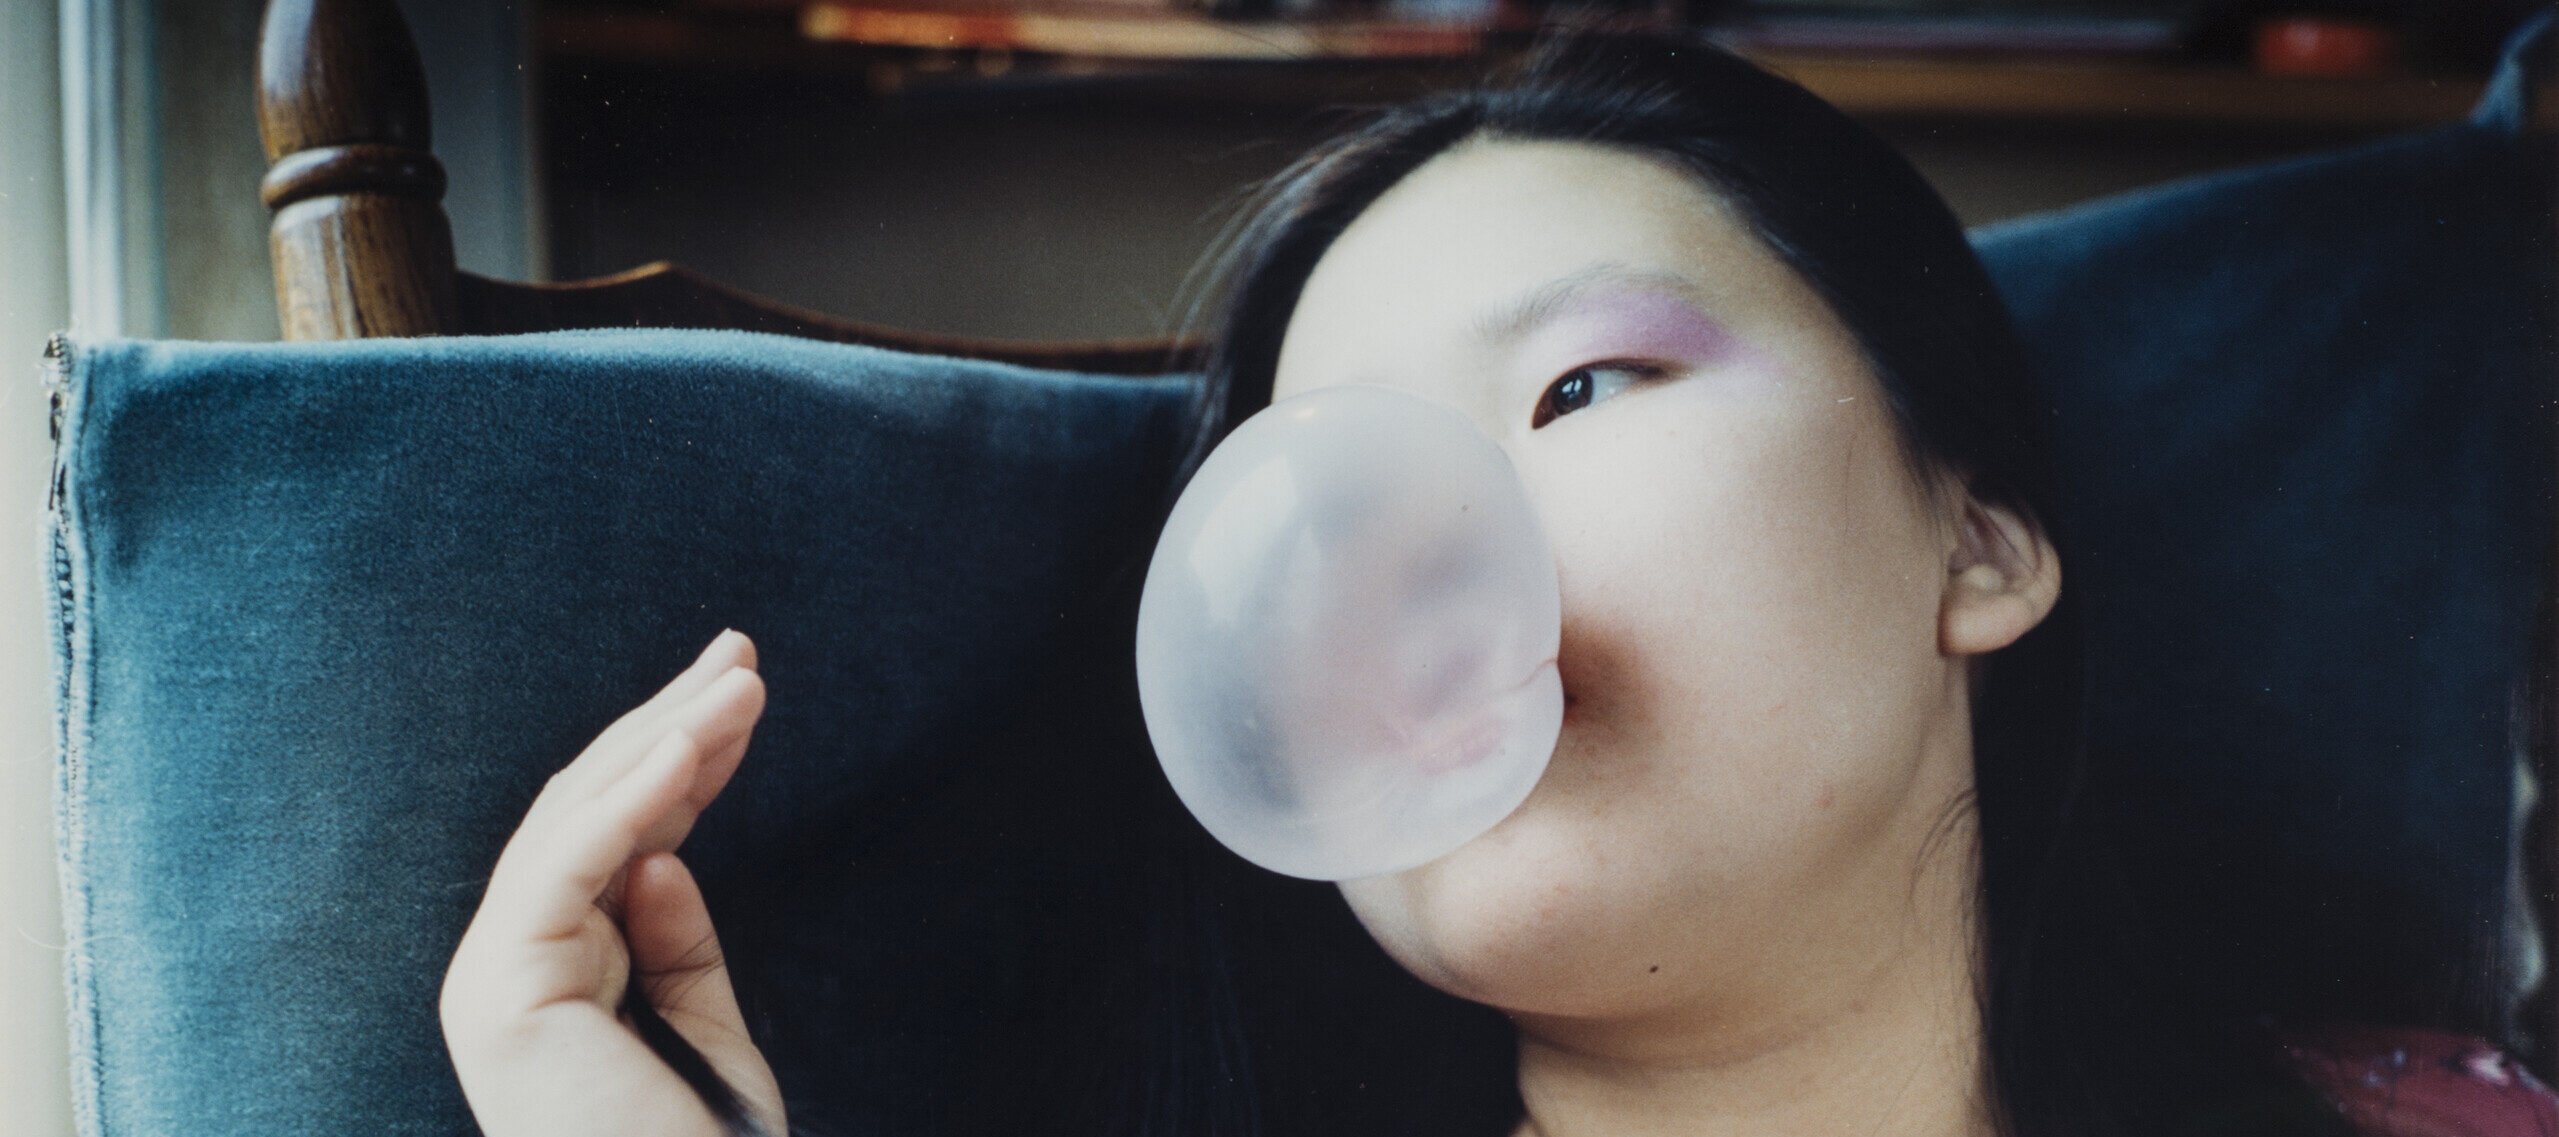 A color photograph of a light skinned person wearing a sheeer floral dress sitting on a chair and reclining back on a large blue pillow. They are blowing a large bubblegum bubble while gazing to the left of the frame.